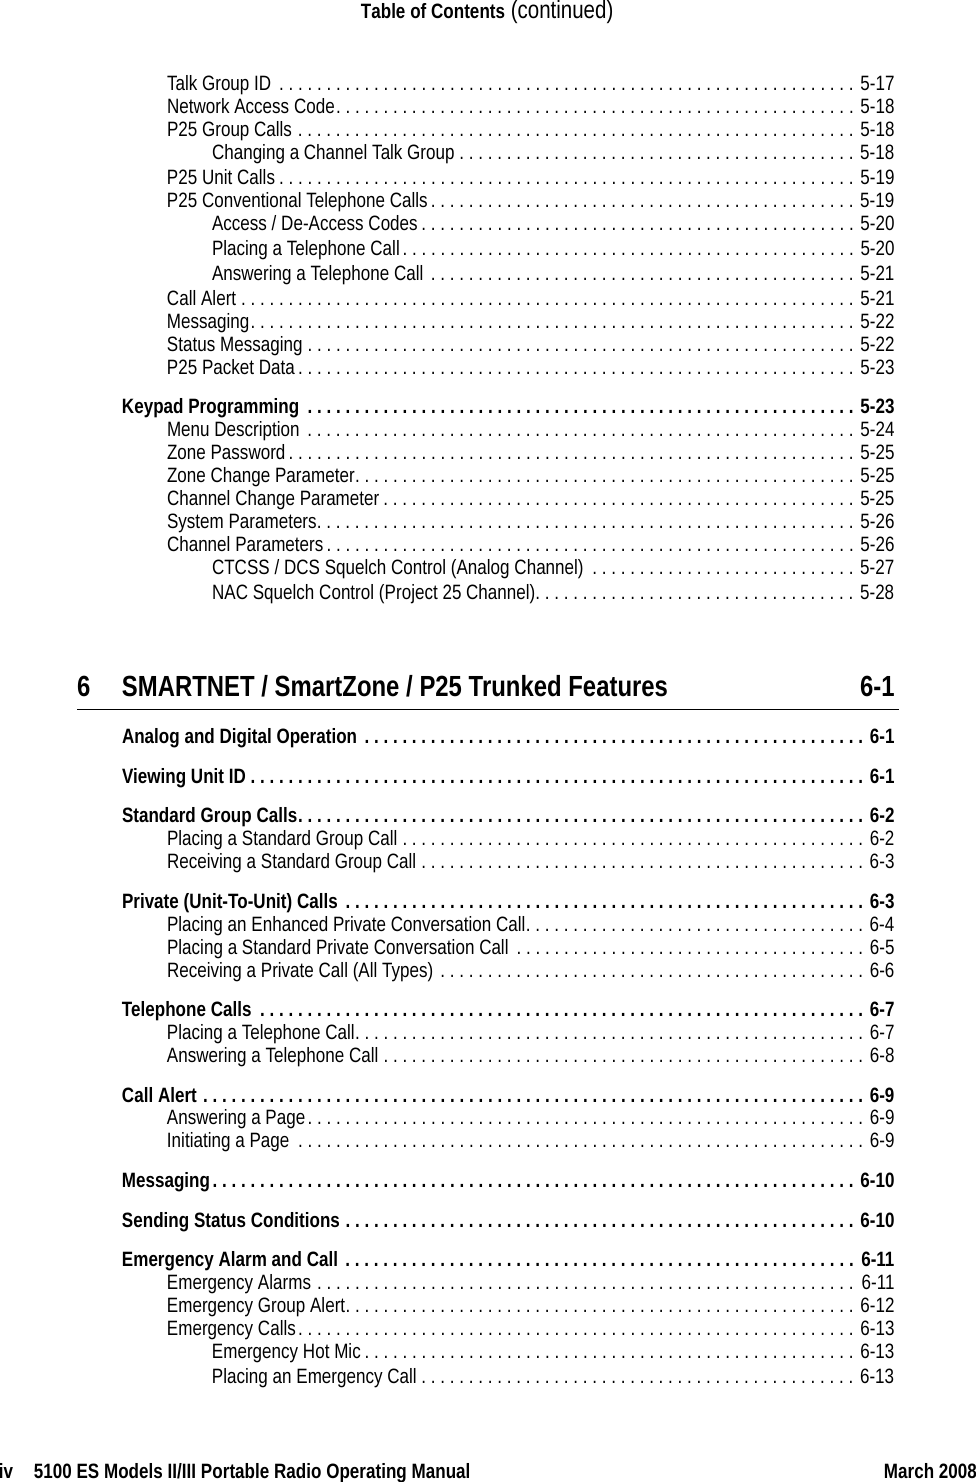 iv  5100 ES Models II/III Portable Radio Operating Manual March 2008Table of Contents (continued)Talk Group ID . . . . . . . . . . . . . . . . . . . . . . . . . . . . . . . . . . . . . . . . . . . . . . . . . . . . . . . . . . . . . 5-17Network Access Code. . . . . . . . . . . . . . . . . . . . . . . . . . . . . . . . . . . . . . . . . . . . . . . . . . . . . . . 5-18P25 Group Calls . . . . . . . . . . . . . . . . . . . . . . . . . . . . . . . . . . . . . . . . . . . . . . . . . . . . . . . . . . . 5-18Changing a Channel Talk Group . . . . . . . . . . . . . . . . . . . . . . . . . . . . . . . . . . . . . . . . . . 5-18P25 Unit Calls. . . . . . . . . . . . . . . . . . . . . . . . . . . . . . . . . . . . . . . . . . . . . . . . . . . . . . . . . . . . . 5-19P25 Conventional Telephone Calls. . . . . . . . . . . . . . . . . . . . . . . . . . . . . . . . . . . . . . . . . . . . . 5-19Access / De-Access Codes. . . . . . . . . . . . . . . . . . . . . . . . . . . . . . . . . . . . . . . . . . . . . . 5-20Placing a Telephone Call. . . . . . . . . . . . . . . . . . . . . . . . . . . . . . . . . . . . . . . . . . . . . . . . 5-20Answering a Telephone Call . . . . . . . . . . . . . . . . . . . . . . . . . . . . . . . . . . . . . . . . . . . . . 5-21Call Alert . . . . . . . . . . . . . . . . . . . . . . . . . . . . . . . . . . . . . . . . . . . . . . . . . . . . . . . . . . . . . . . . . 5-21Messaging. . . . . . . . . . . . . . . . . . . . . . . . . . . . . . . . . . . . . . . . . . . . . . . . . . . . . . . . . . . . . . . . 5-22Status Messaging . . . . . . . . . . . . . . . . . . . . . . . . . . . . . . . . . . . . . . . . . . . . . . . . . . . . . . . . . . 5-22P25 Packet Data. . . . . . . . . . . . . . . . . . . . . . . . . . . . . . . . . . . . . . . . . . . . . . . . . . . . . . . . . . . 5-23Keypad Programming . . . . . . . . . . . . . . . . . . . . . . . . . . . . . . . . . . . . . . . . . . . . . . . . . . . . . . . . . . 5-23Menu Description . . . . . . . . . . . . . . . . . . . . . . . . . . . . . . . . . . . . . . . . . . . . . . . . . . . . . . . . . . 5-24Zone Password. . . . . . . . . . . . . . . . . . . . . . . . . . . . . . . . . . . . . . . . . . . . . . . . . . . . . . . . . . . . 5-25Zone Change Parameter. . . . . . . . . . . . . . . . . . . . . . . . . . . . . . . . . . . . . . . . . . . . . . . . . . . . . 5-25Channel Change Parameter. . . . . . . . . . . . . . . . . . . . . . . . . . . . . . . . . . . . . . . . . . . . . . . . . . 5-25System Parameters. . . . . . . . . . . . . . . . . . . . . . . . . . . . . . . . . . . . . . . . . . . . . . . . . . . . . . . . . 5-26Channel Parameters. . . . . . . . . . . . . . . . . . . . . . . . . . . . . . . . . . . . . . . . . . . . . . . . . . . . . . . . 5-26CTCSS / DCS Squelch Control (Analog Channel) . . . . . . . . . . . . . . . . . . . . . . . . . . . . 5-27NAC Squelch Control (Project 25 Channel). . . . . . . . . . . . . . . . . . . . . . . . . . . . . . . . . . 5-286 SMARTNET / SmartZone / P25 Trunked Features 6-1Analog and Digital Operation . . . . . . . . . . . . . . . . . . . . . . . . . . . . . . . . . . . . . . . . . . . . . . . . . . . . . 6-1Viewing Unit ID . . . . . . . . . . . . . . . . . . . . . . . . . . . . . . . . . . . . . . . . . . . . . . . . . . . . . . . . . . . . . . . . . 6-1Standard Group Calls. . . . . . . . . . . . . . . . . . . . . . . . . . . . . . . . . . . . . . . . . . . . . . . . . . . . . . . . . . . . 6-2Placing a Standard Group Call . . . . . . . . . . . . . . . . . . . . . . . . . . . . . . . . . . . . . . . . . . . . . . . . . 6-2Receiving a Standard Group Call . . . . . . . . . . . . . . . . . . . . . . . . . . . . . . . . . . . . . . . . . . . . . . . 6-3Private (Unit-To-Unit) Calls . . . . . . . . . . . . . . . . . . . . . . . . . . . . . . . . . . . . . . . . . . . . . . . . . . . . . . . 6-3Placing an Enhanced Private Conversation Call. . . . . . . . . . . . . . . . . . . . . . . . . . . . . . . . . . . . 6-4Placing a Standard Private Conversation Call . . . . . . . . . . . . . . . . . . . . . . . . . . . . . . . . . . . . . 6-5Receiving a Private Call (All Types) . . . . . . . . . . . . . . . . . . . . . . . . . . . . . . . . . . . . . . . . . . . . . 6-6Telephone Calls . . . . . . . . . . . . . . . . . . . . . . . . . . . . . . . . . . . . . . . . . . . . . . . . . . . . . . . . . . . . . . . . 6-7Placing a Telephone Call. . . . . . . . . . . . . . . . . . . . . . . . . . . . . . . . . . . . . . . . . . . . . . . . . . . . . . 6-7Answering a Telephone Call . . . . . . . . . . . . . . . . . . . . . . . . . . . . . . . . . . . . . . . . . . . . . . . . . . . 6-8Call Alert . . . . . . . . . . . . . . . . . . . . . . . . . . . . . . . . . . . . . . . . . . . . . . . . . . . . . . . . . . . . . . . . . . . . . . 6-9Answering a Page. . . . . . . . . . . . . . . . . . . . . . . . . . . . . . . . . . . . . . . . . . . . . . . . . . . . . . . . . . . 6-9Initiating a Page . . . . . . . . . . . . . . . . . . . . . . . . . . . . . . . . . . . . . . . . . . . . . . . . . . . . . . . . . . . . 6-9Messaging. . . . . . . . . . . . . . . . . . . . . . . . . . . . . . . . . . . . . . . . . . . . . . . . . . . . . . . . . . . . . . . . . . . . 6-10Sending Status Conditions . . . . . . . . . . . . . . . . . . . . . . . . . . . . . . . . . . . . . . . . . . . . . . . . . . . . . . 6-10Emergency Alarm and Call . . . . . . . . . . . . . . . . . . . . . . . . . . . . . . . . . . . . . . . . . . . . . . . . . . . . . . 6-11Emergency Alarms . . . . . . . . . . . . . . . . . . . . . . . . . . . . . . . . . . . . . . . . . . . . . . . . . . . . . . . . . 6-11Emergency Group Alert. . . . . . . . . . . . . . . . . . . . . . . . . . . . . . . . . . . . . . . . . . . . . . . . . . . . . . 6-12Emergency Calls. . . . . . . . . . . . . . . . . . . . . . . . . . . . . . . . . . . . . . . . . . . . . . . . . . . . . . . . . . . 6-13Emergency Hot Mic. . . . . . . . . . . . . . . . . . . . . . . . . . . . . . . . . . . . . . . . . . . . . . . . . . . . 6-13Placing an Emergency Call . . . . . . . . . . . . . . . . . . . . . . . . . . . . . . . . . . . . . . . . . . . . . . 6-13